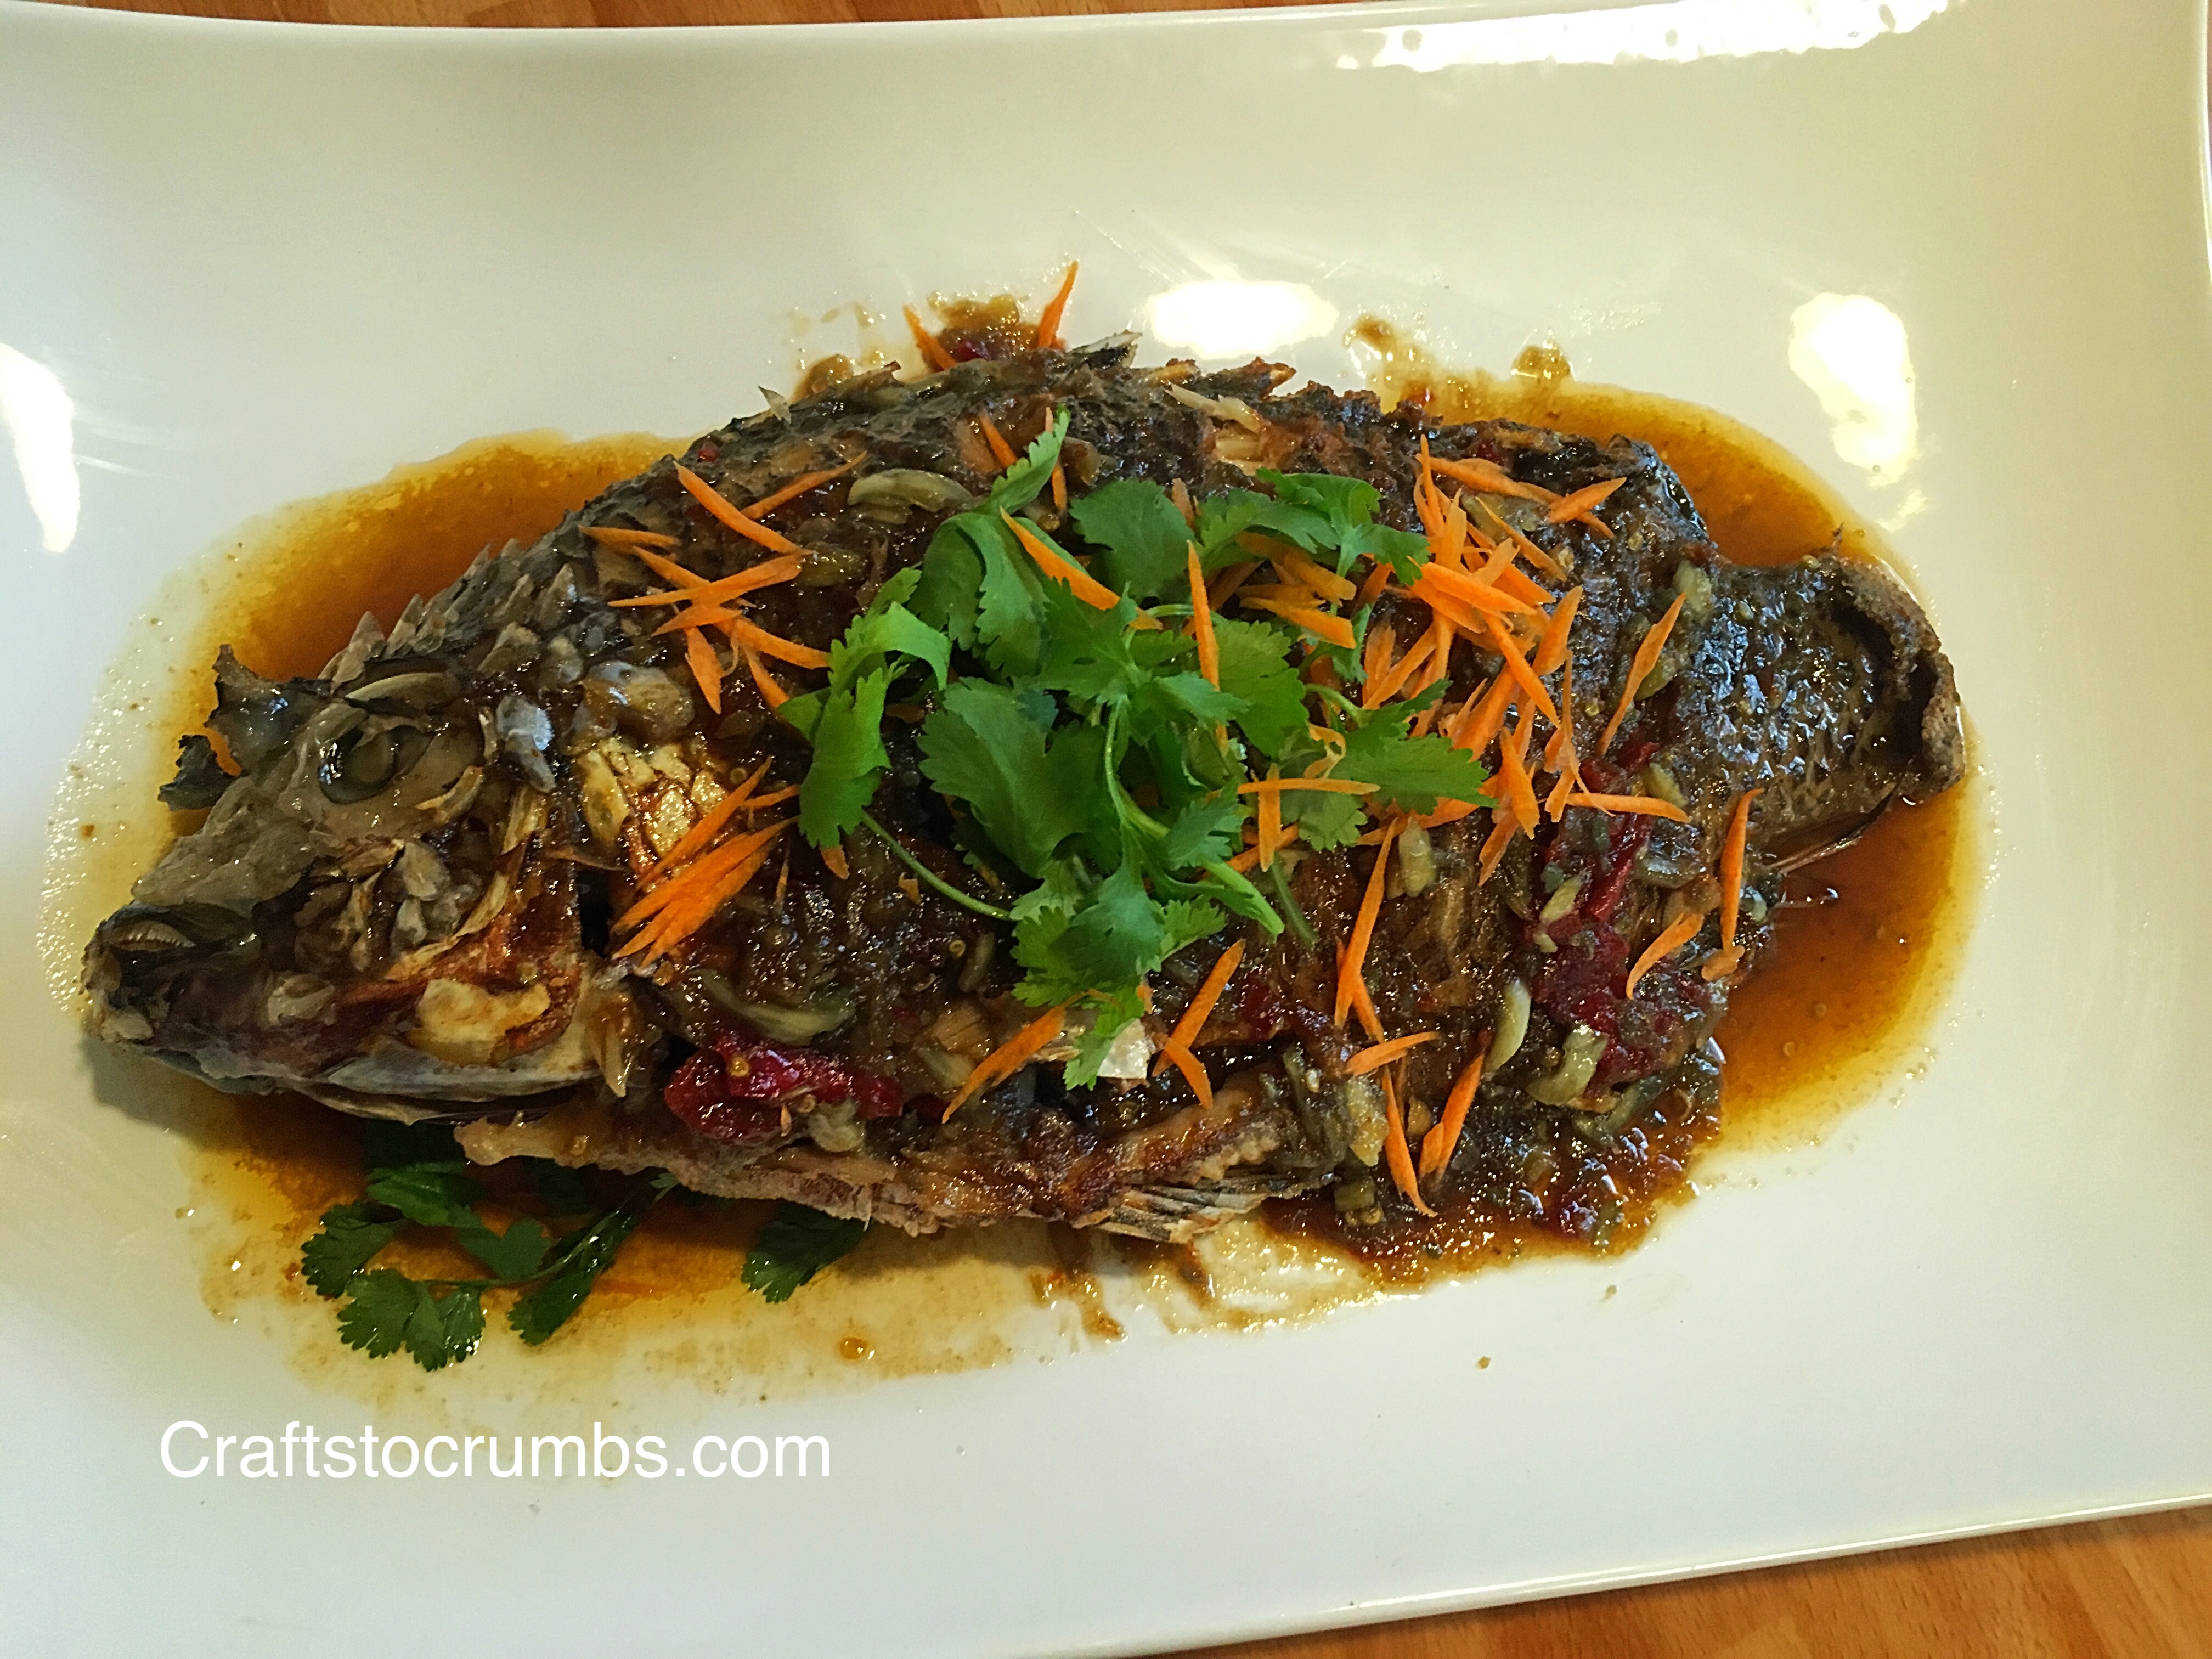 Crafts to Crumbs Fried Fish with Tamarind Chili Sauce